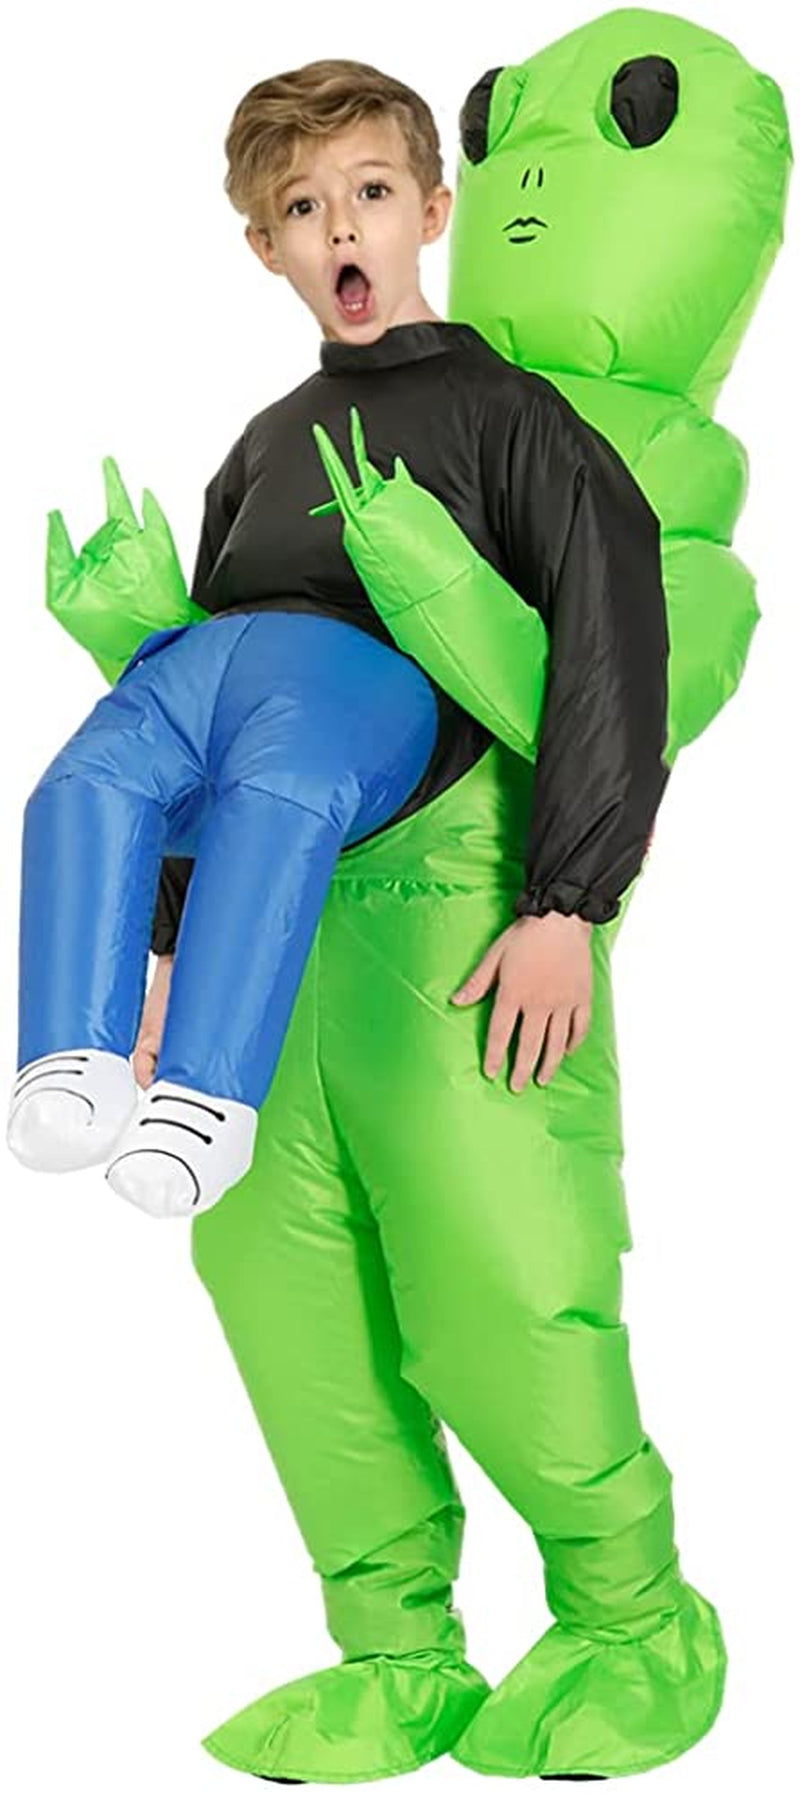 Poptrend Inflatable Alien Costume Inflatable Halloween Costumes Blow up Alien Costume for Halloween, Easter,Christmas…